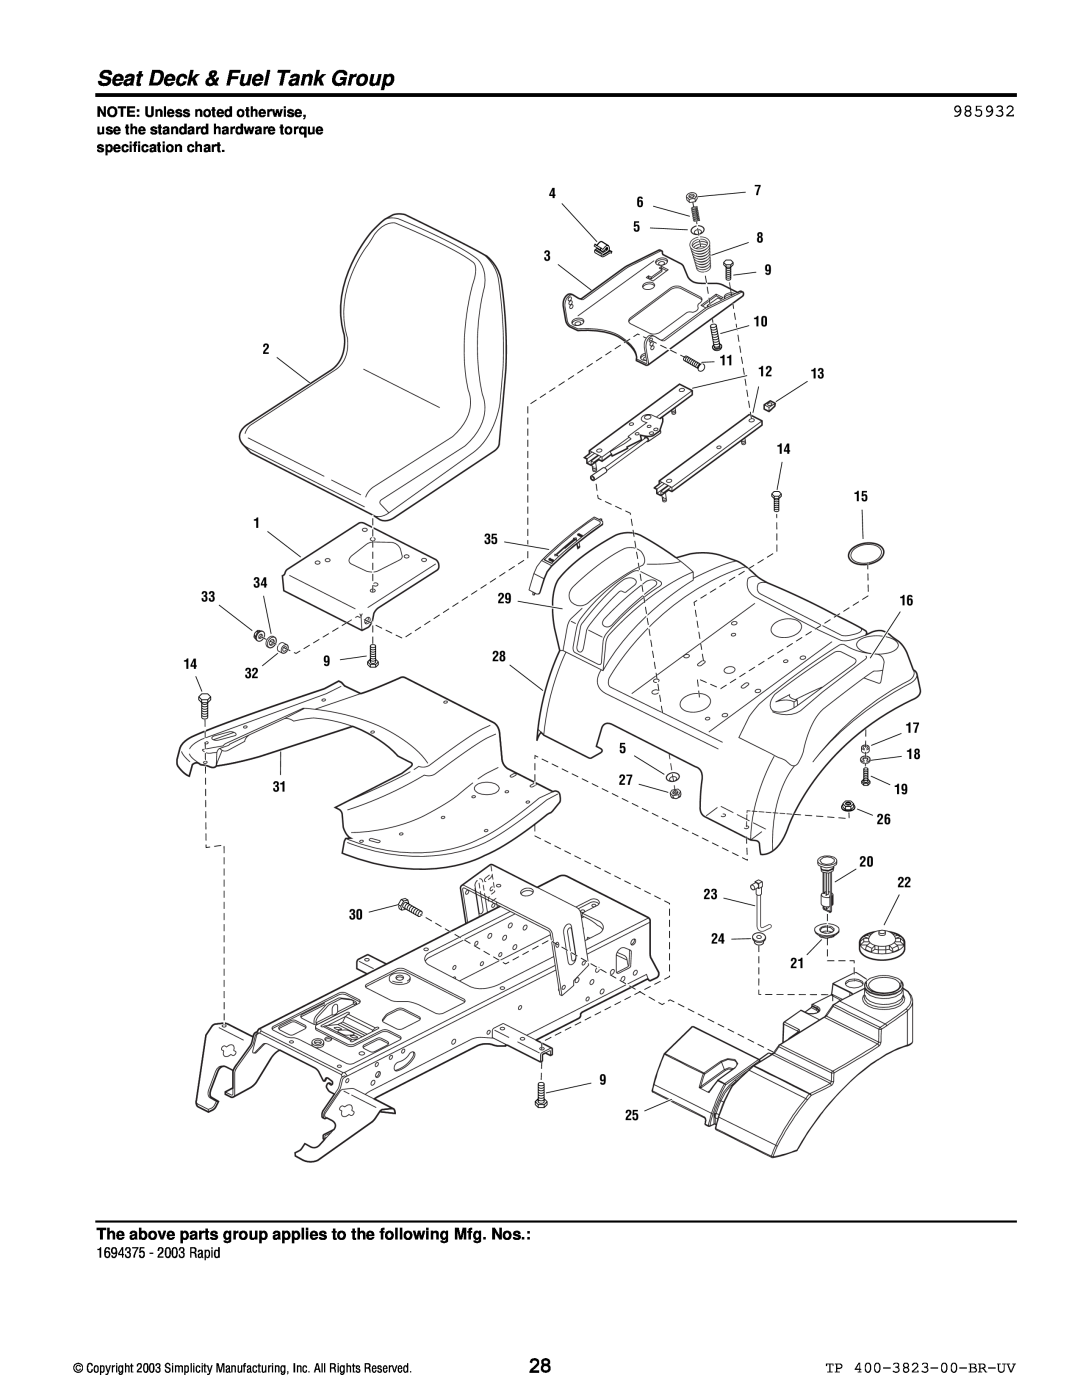 Simplicity 2003 Rapid manual Seat Deck & Fuel Tank Group, 985932, The above parts group applies to the following Mfg. Nos 